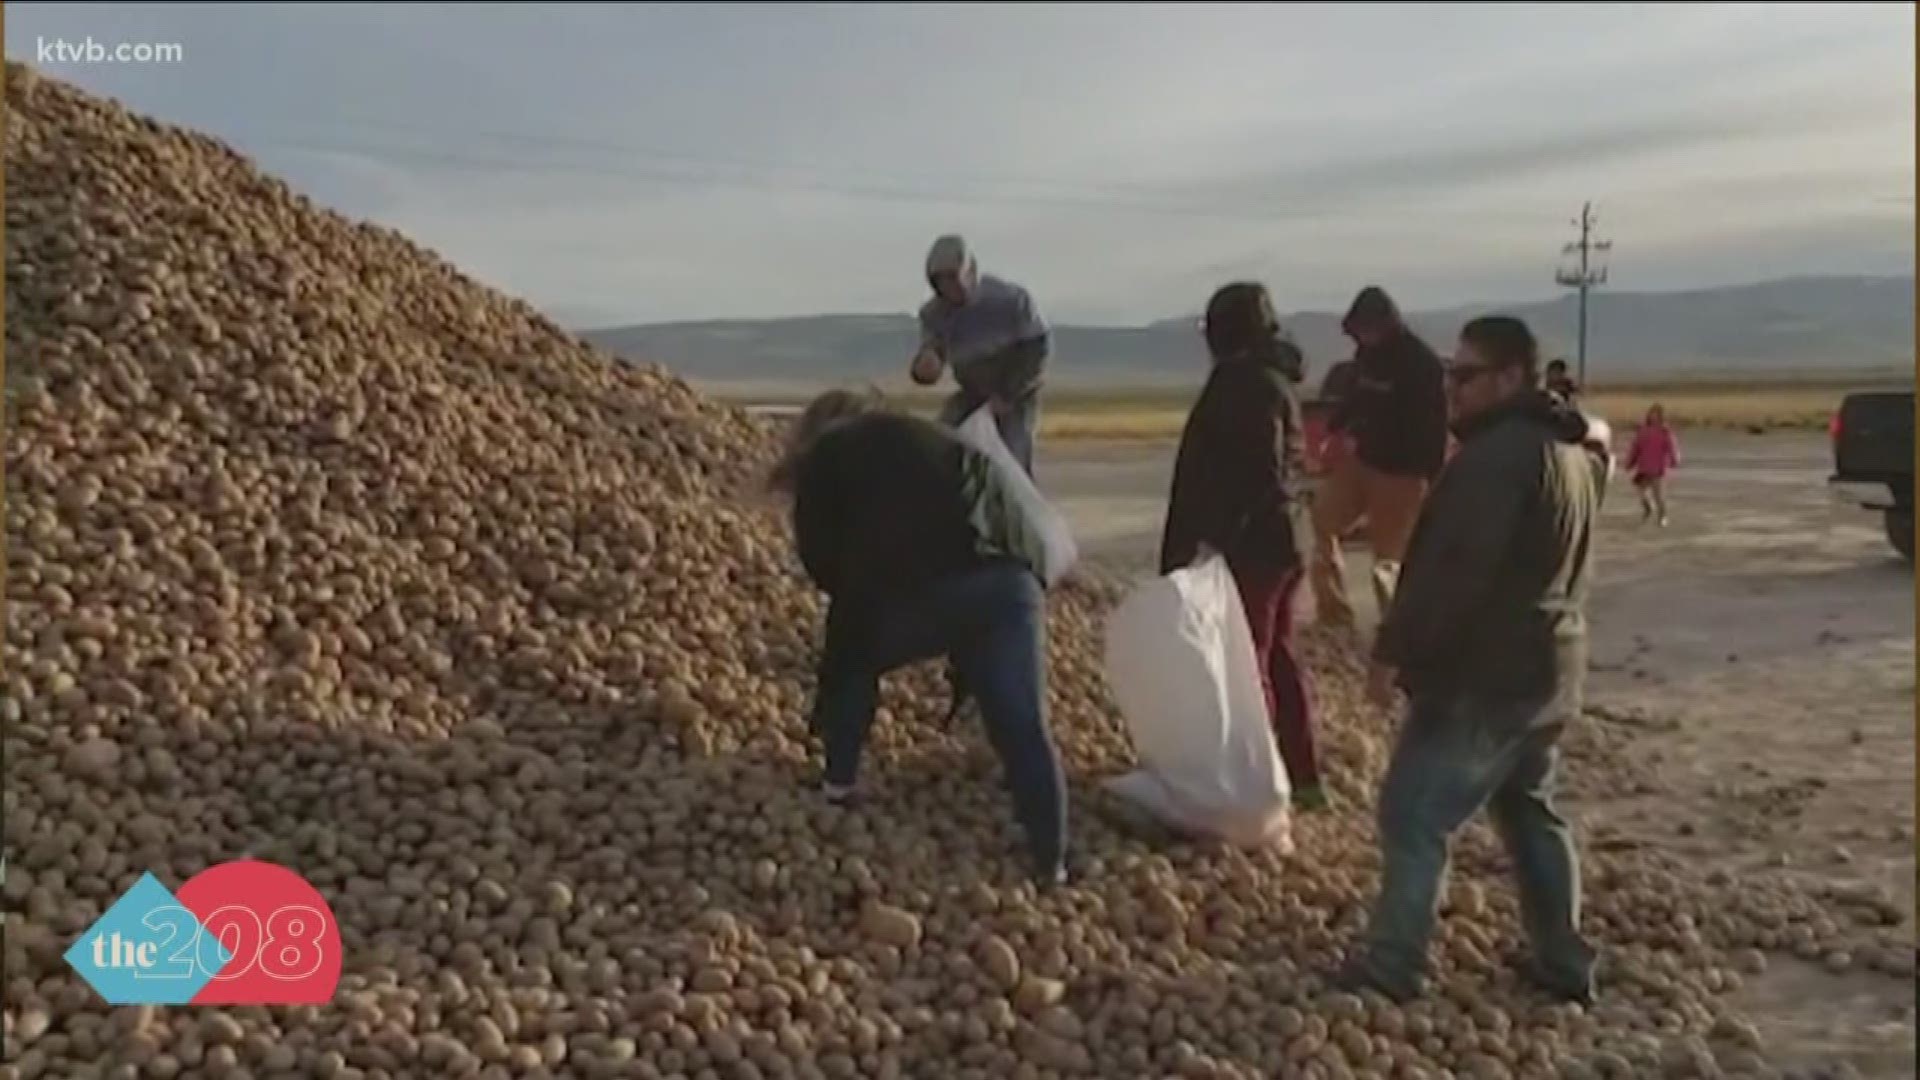 Cranney Farms in Oakley has thousands of potatoes they were expecting to sell. Instead of dumping them, they gave them away.